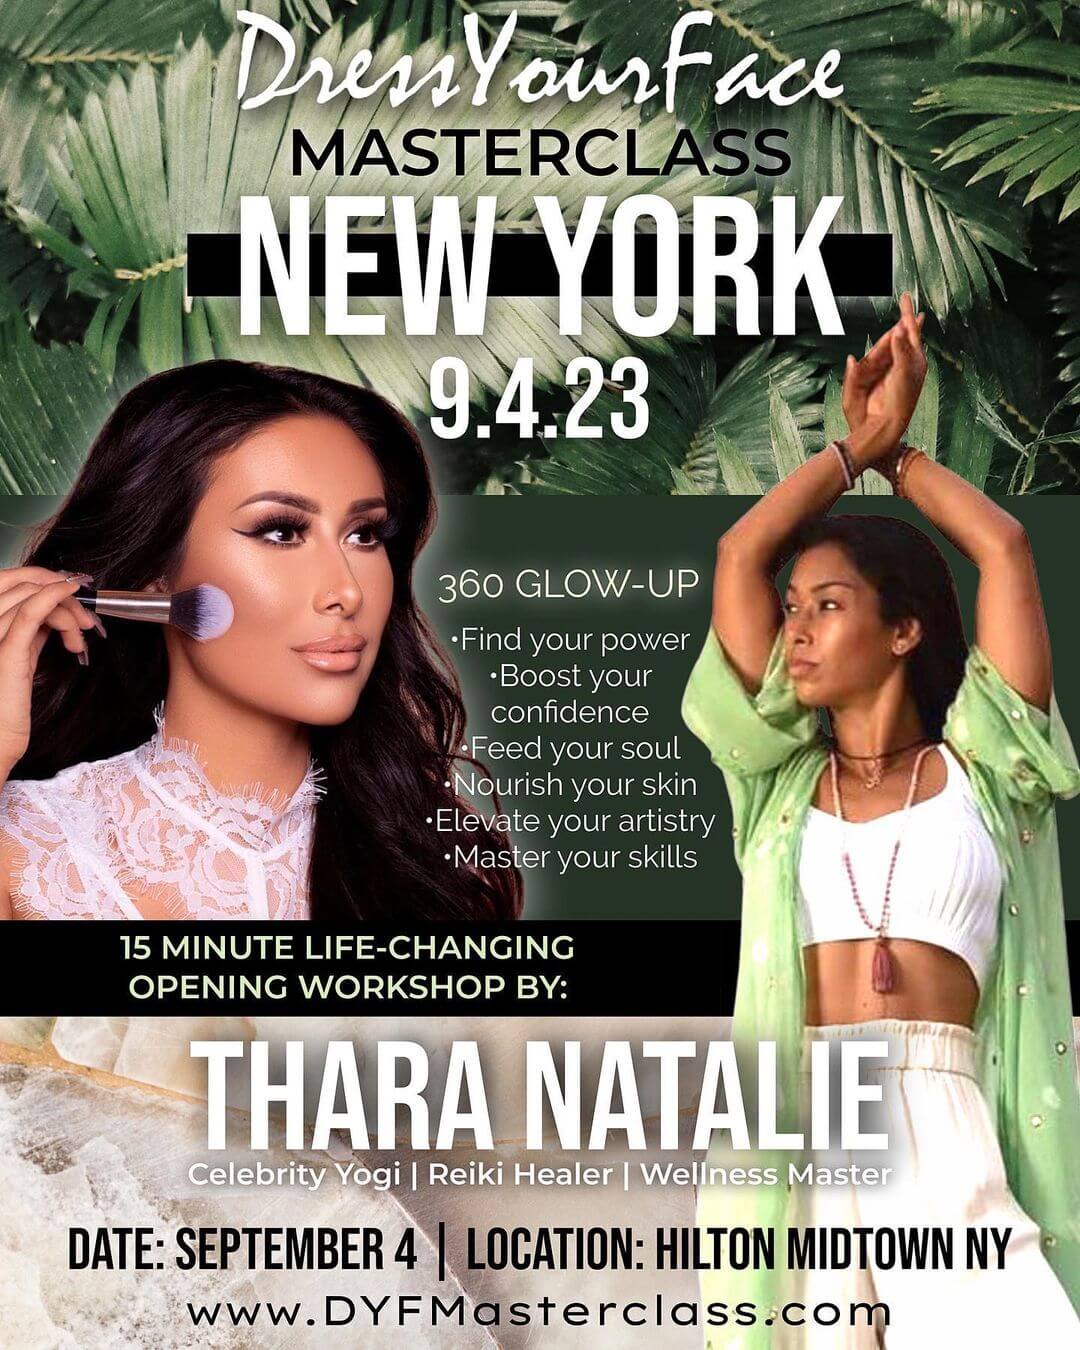 Event Alert: Catch Tamanna Roashan In New York For Her Latest Dress Your Face Masterclass